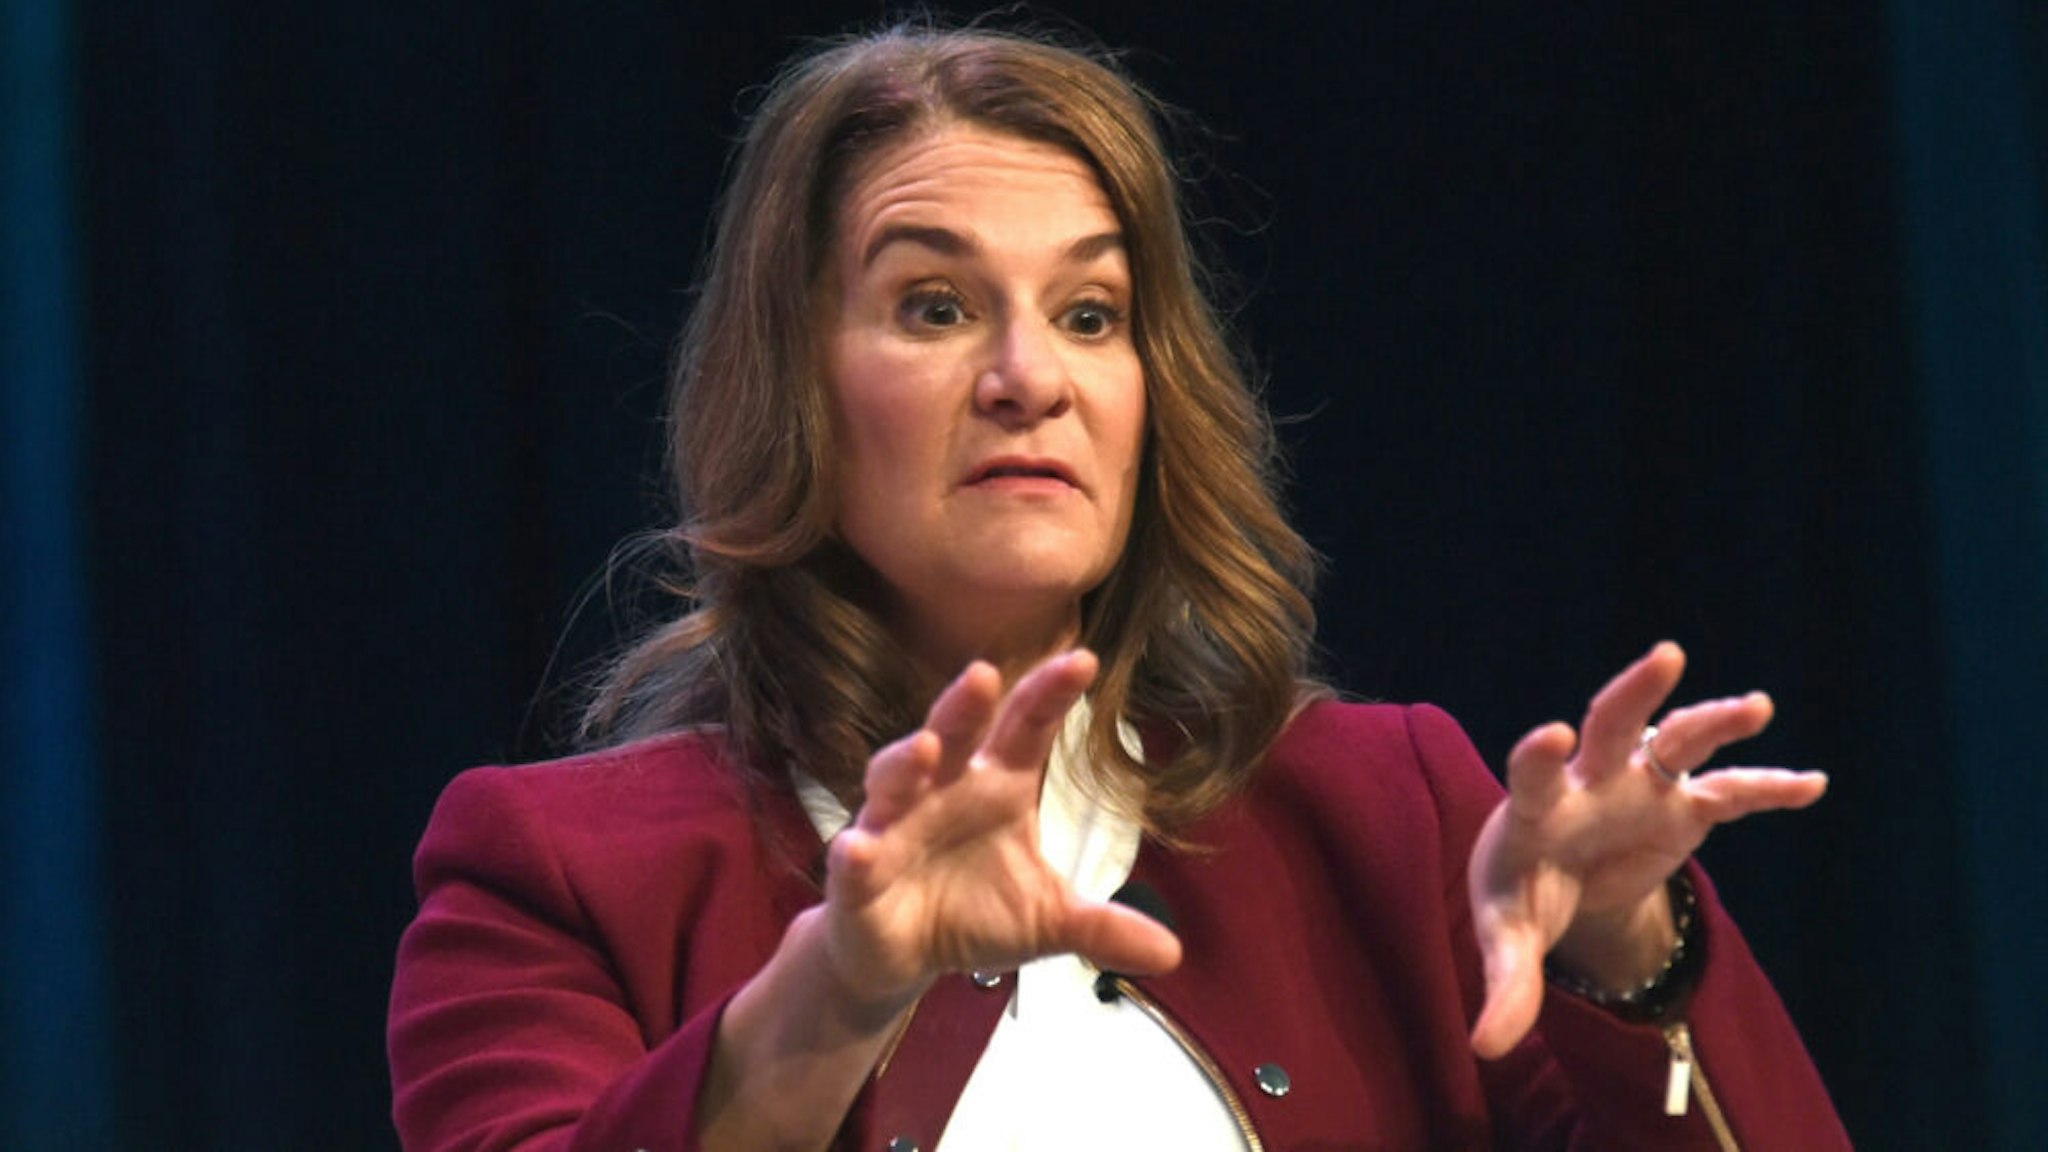 AUSTIN, TX - MARCH 11: Melinda Gates speaks onstage at the Interactive Keynote during SXSW at Austin Convention Center on March 11, 2018 in Austin, Texas.